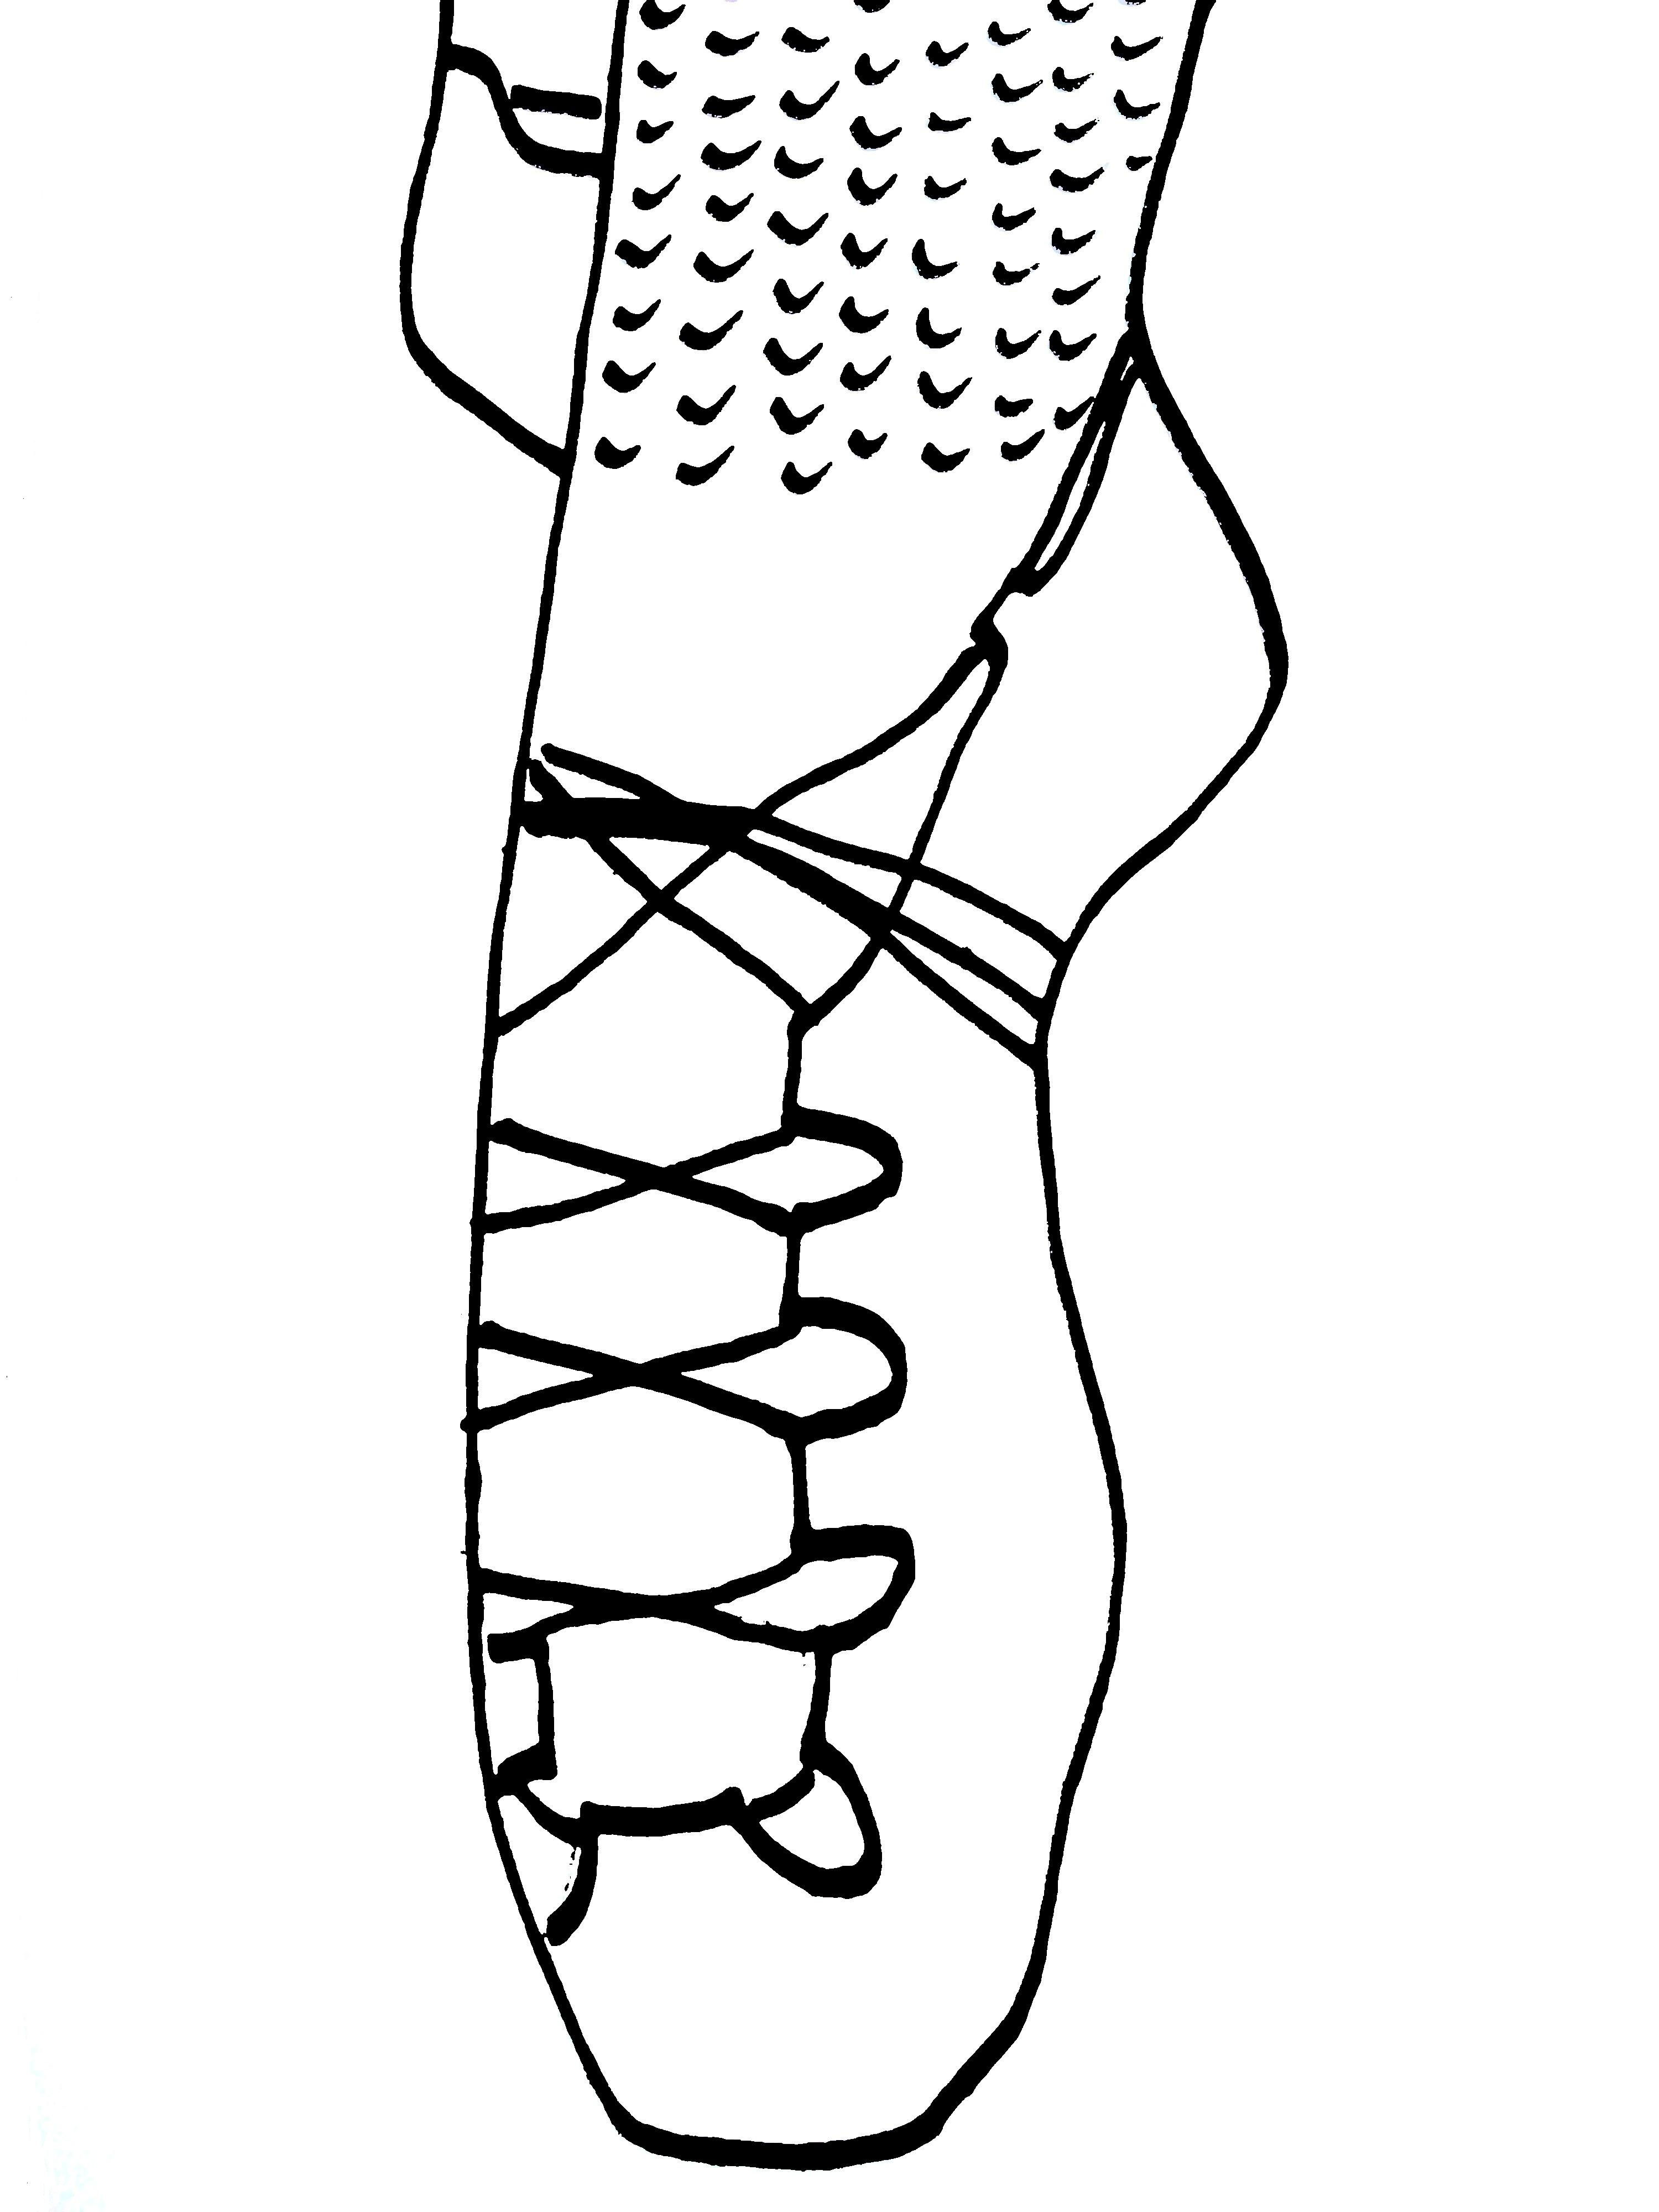 Dancing Coloring Pages Dancer 39 Jobs Printable Coloring Pages